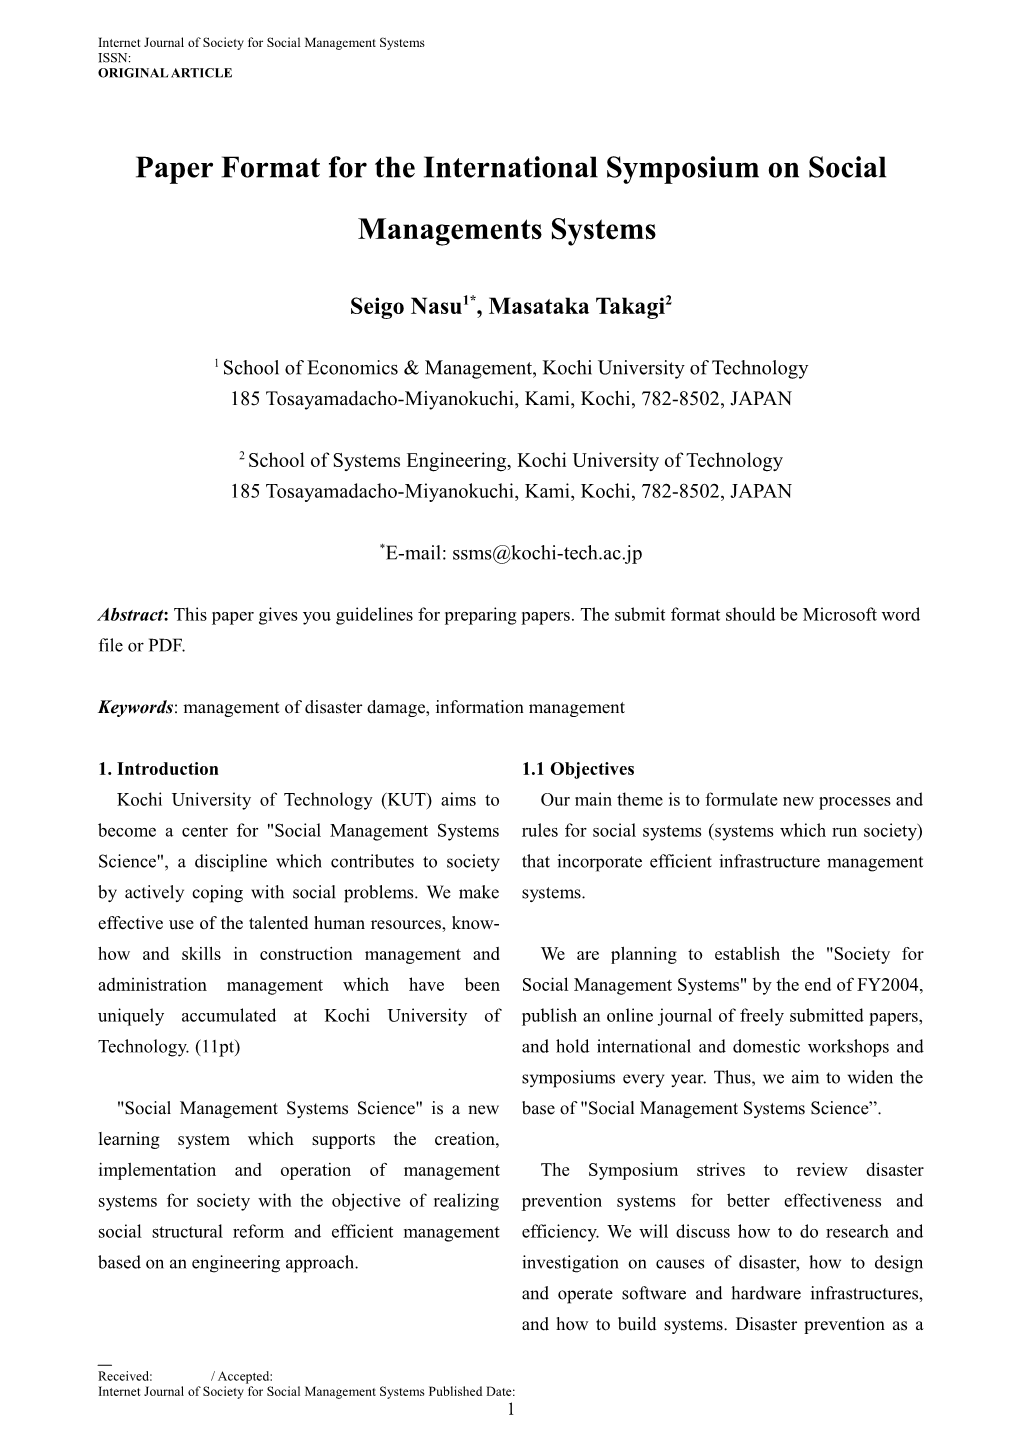 PAPER FORMAT for the INTERNATIONAL SYMPOSIUM on MANAGEMENTS SYSTEMS for DISASTER PREVENTION